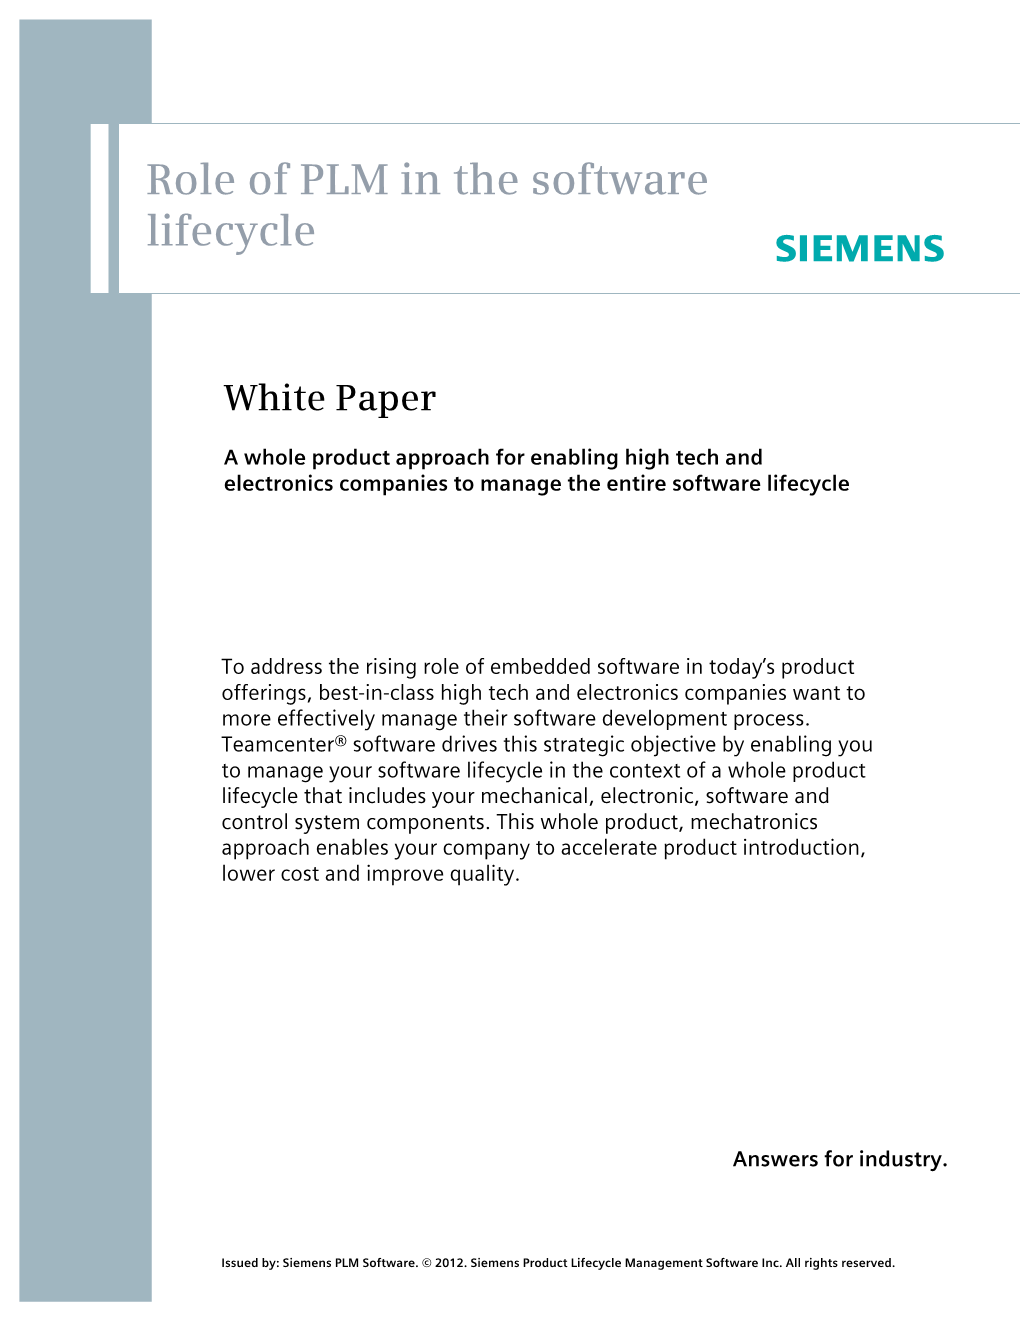 Role of PLM in the Software Lifecycle 2